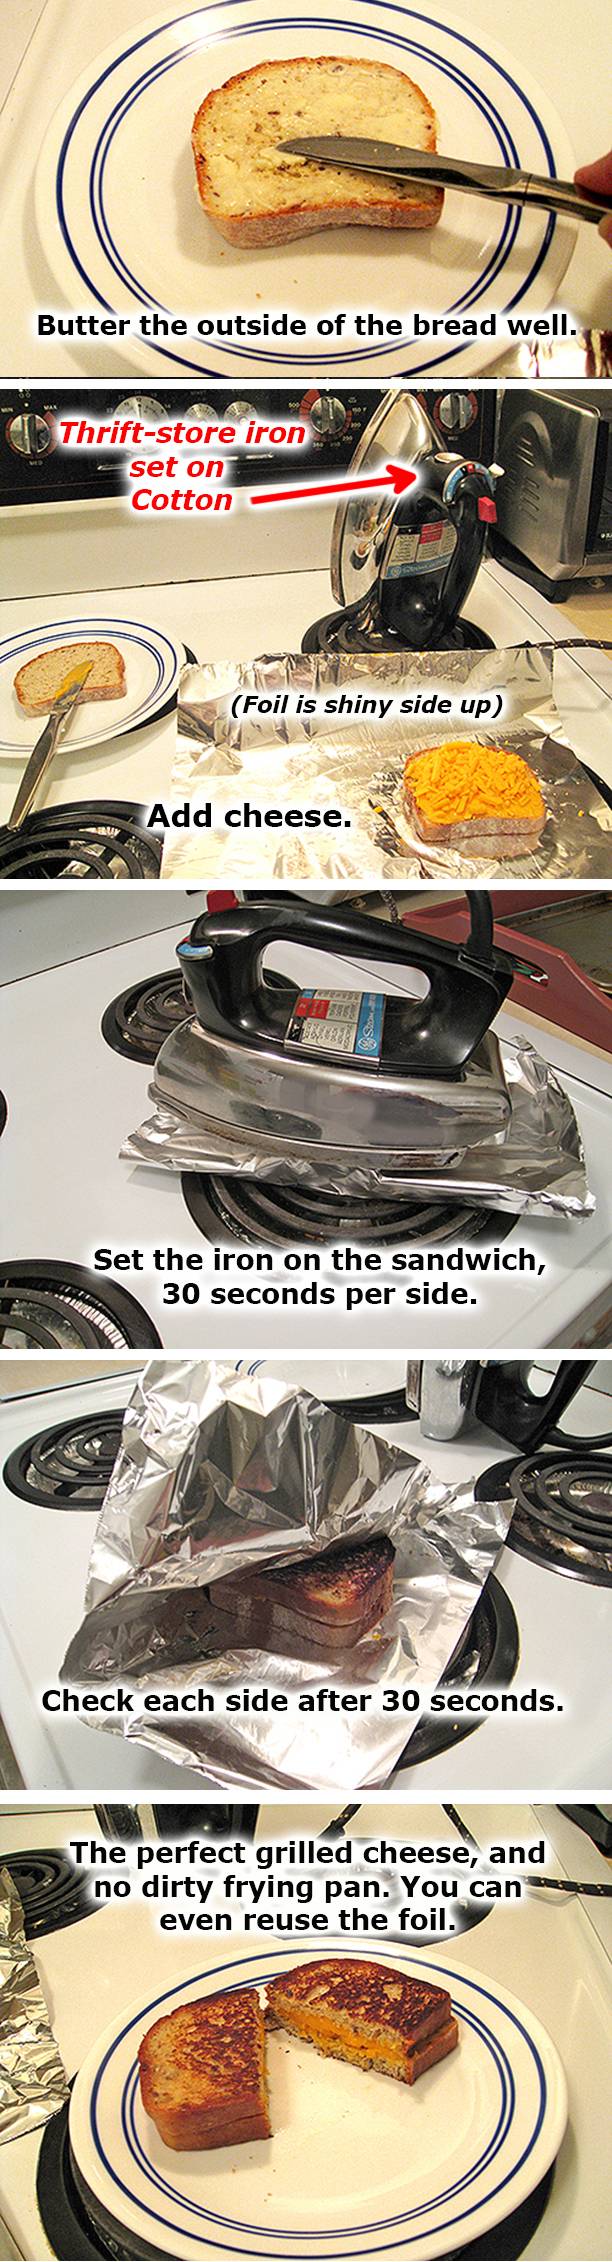 How to Make a Grilled Cheese